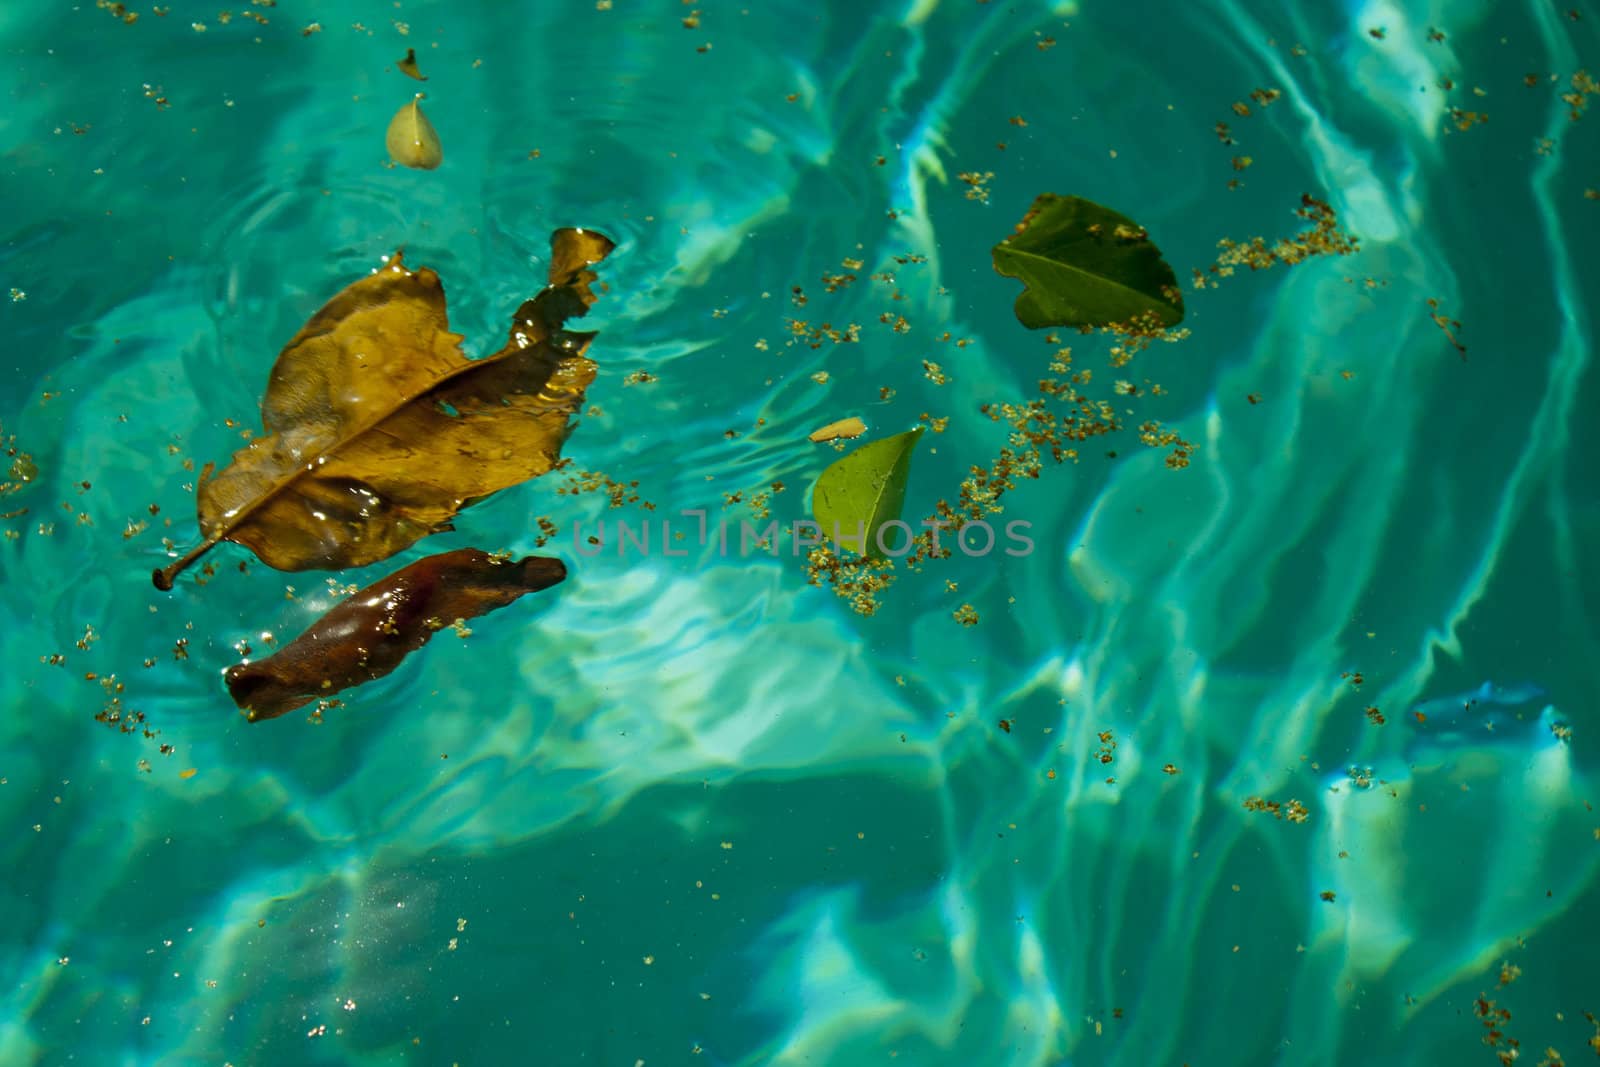 Floating leaves by edhunt